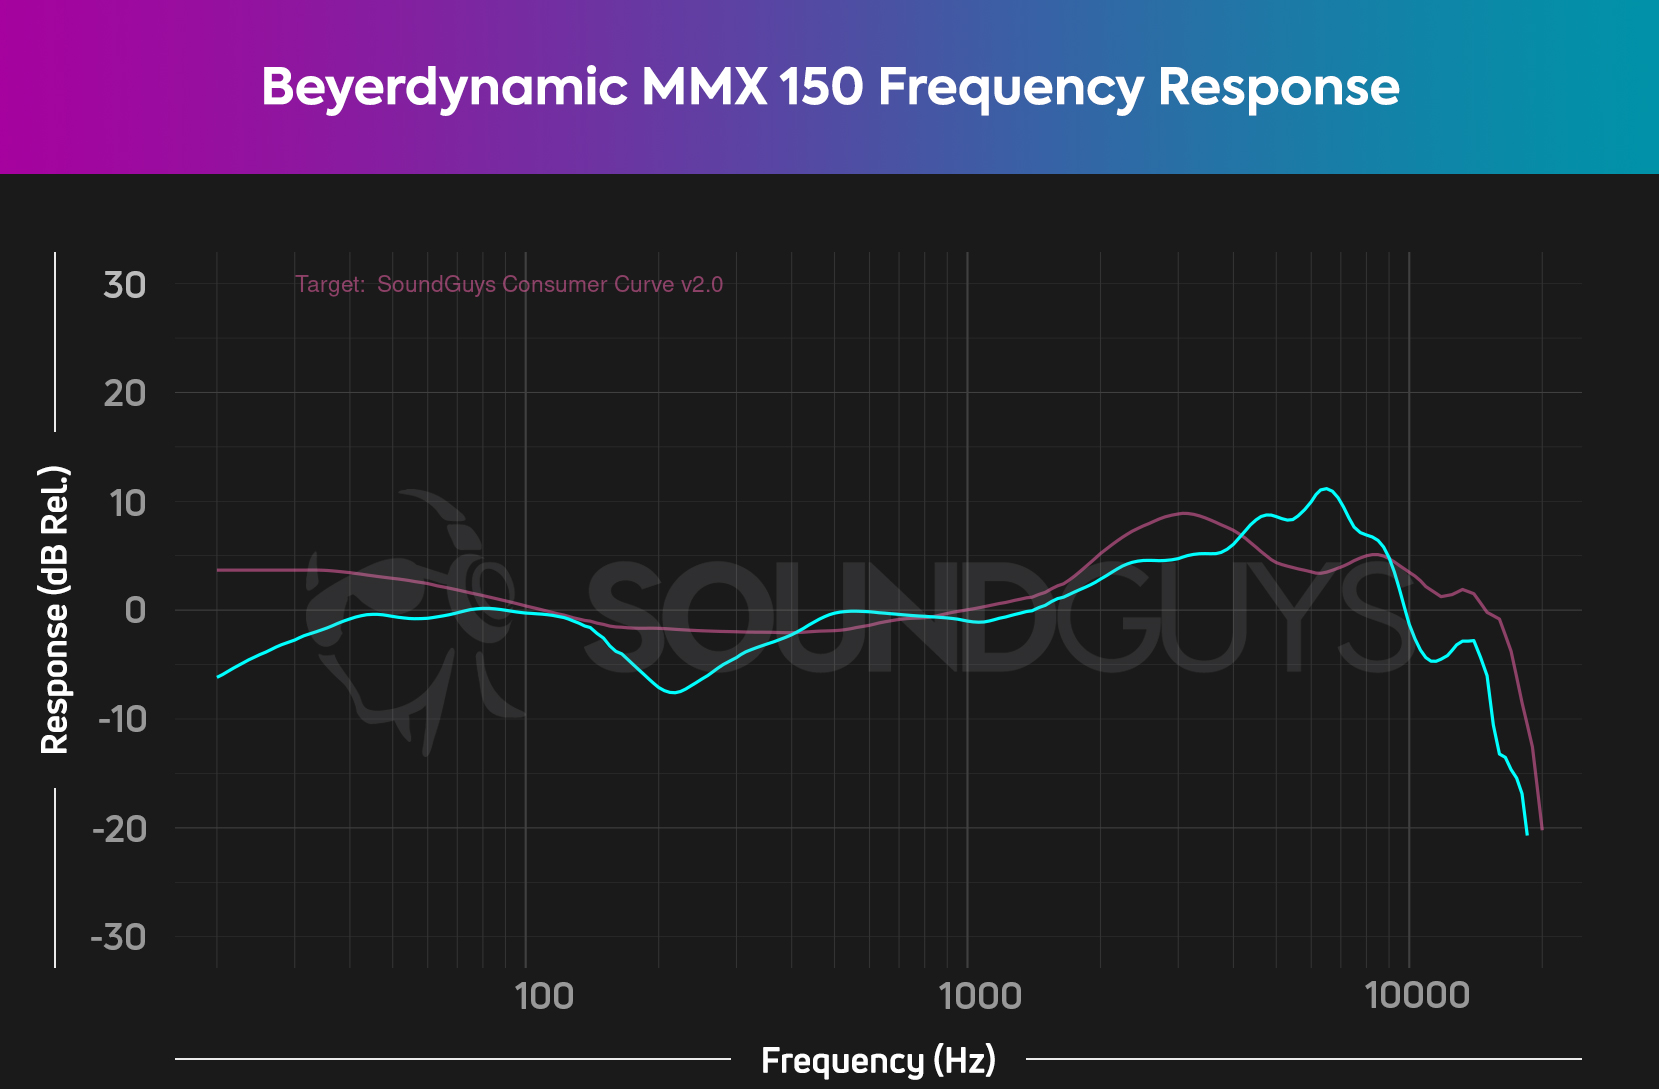 A frequency response chart for the Beyerdynamic MMX 150 gaming headset, which shows a slight lack of emphasis in the sub-bass range.